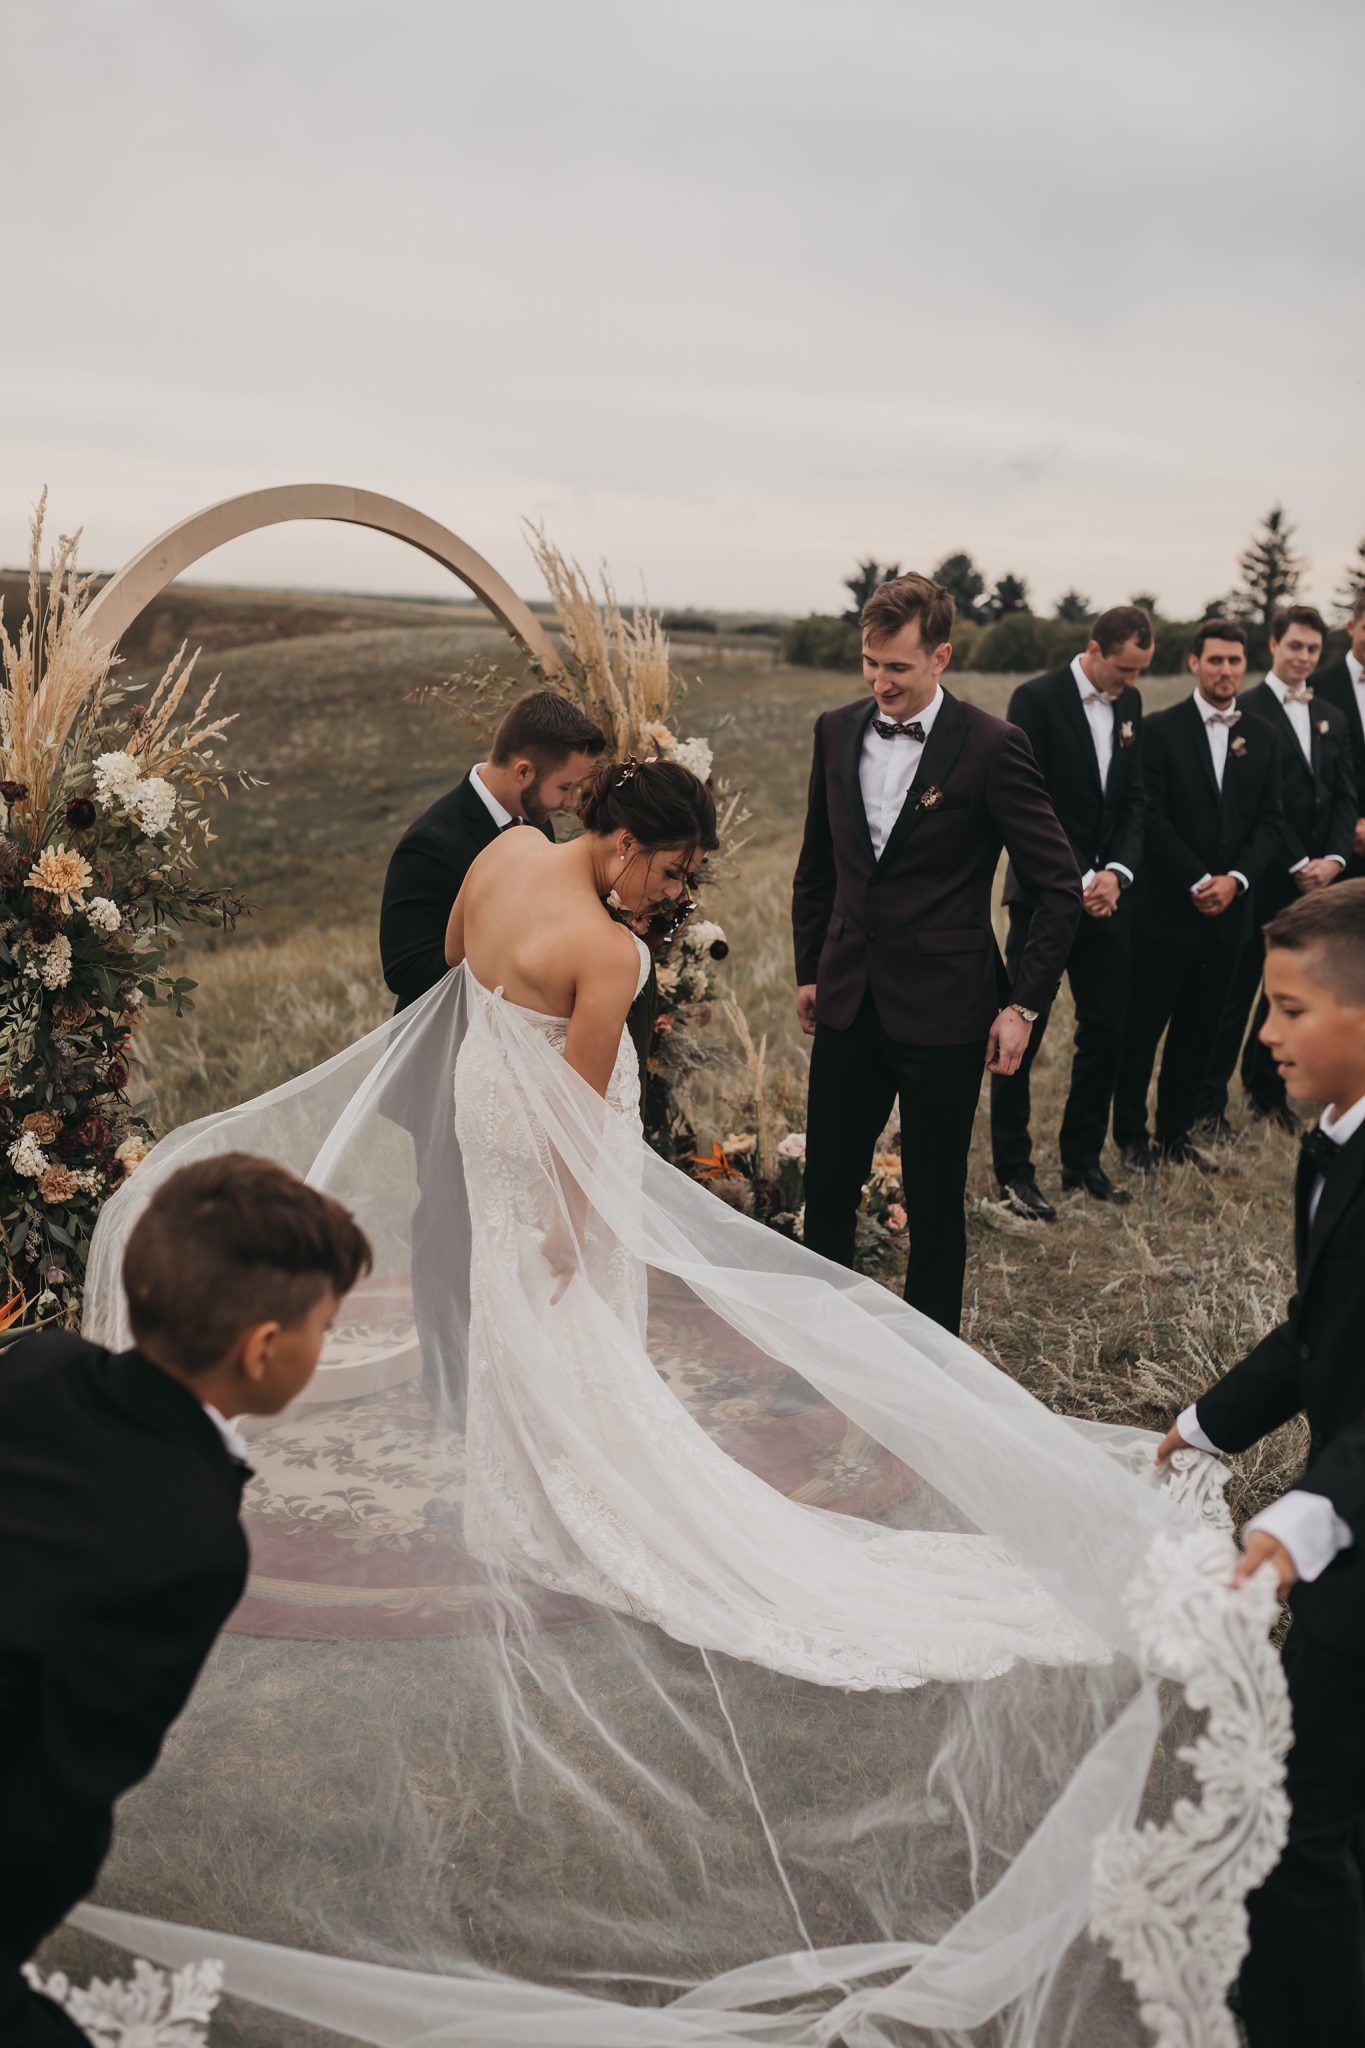 Real Wedding - Countryside Nuptials & Moroccan Styled Reception - featured on Junebug and Bronte Bride, outdoor valley ceremony, intimate wedding ceremony